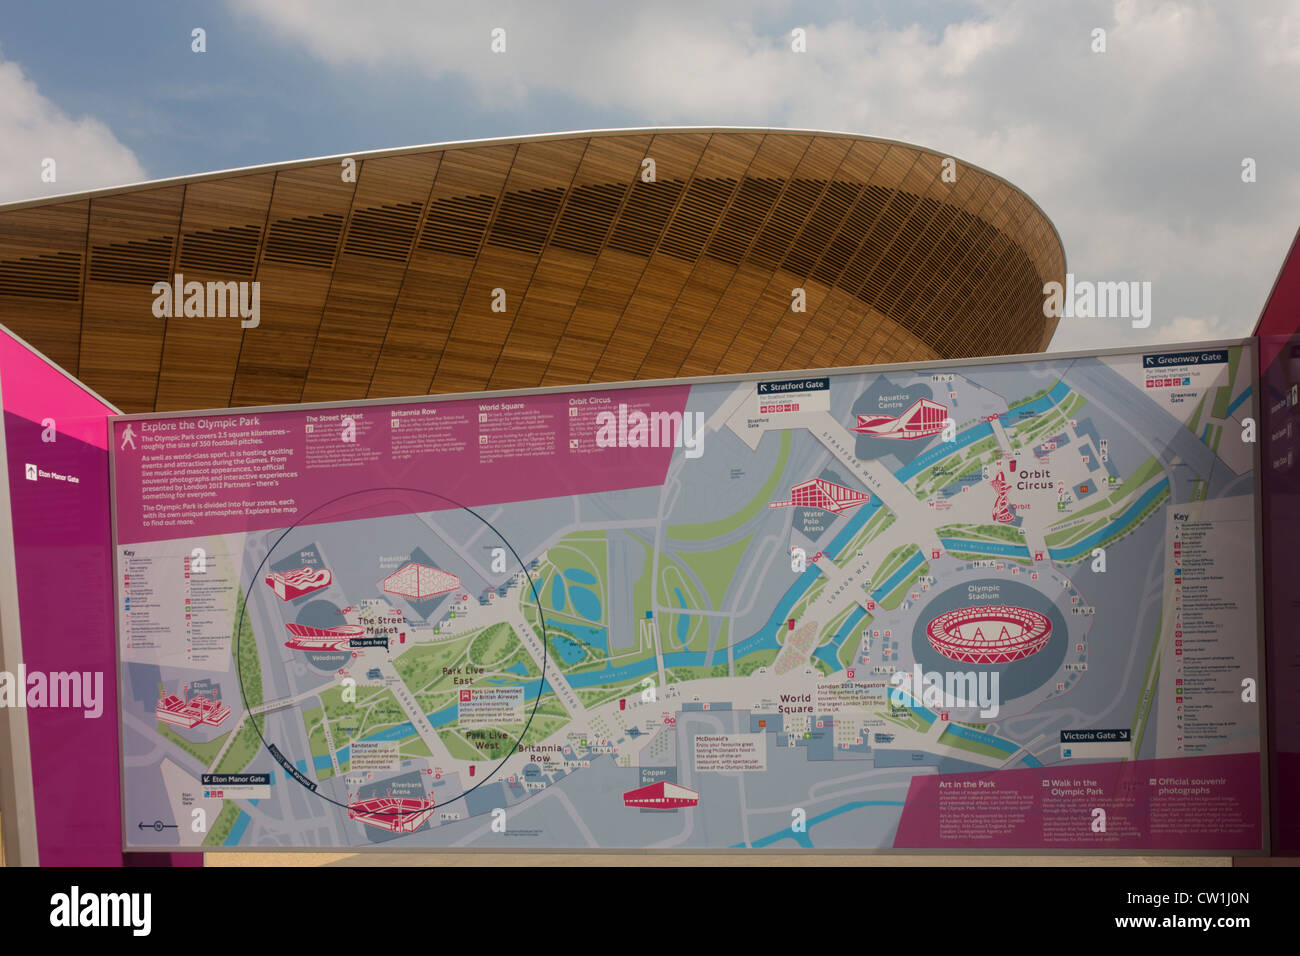 A map and exterior of the £105m Siberian Pine Velodrome curved roof during the London 2012 Olympics. The London Velopark is a cycling centre in Leyton in east London. It is one of the permanent Olympic and Paralympic venues for the 2012 Games. The Velopark is at the northern end of Olympic Park. It has a velodrome and BMX racing track, which will be used for the Games, as well as a one-mile (1.6 km) road course and a mountain bike track. The park replaces the Eastway Cycle Circuit demolished to make way for it.(More captions in Description..) Stock Photo